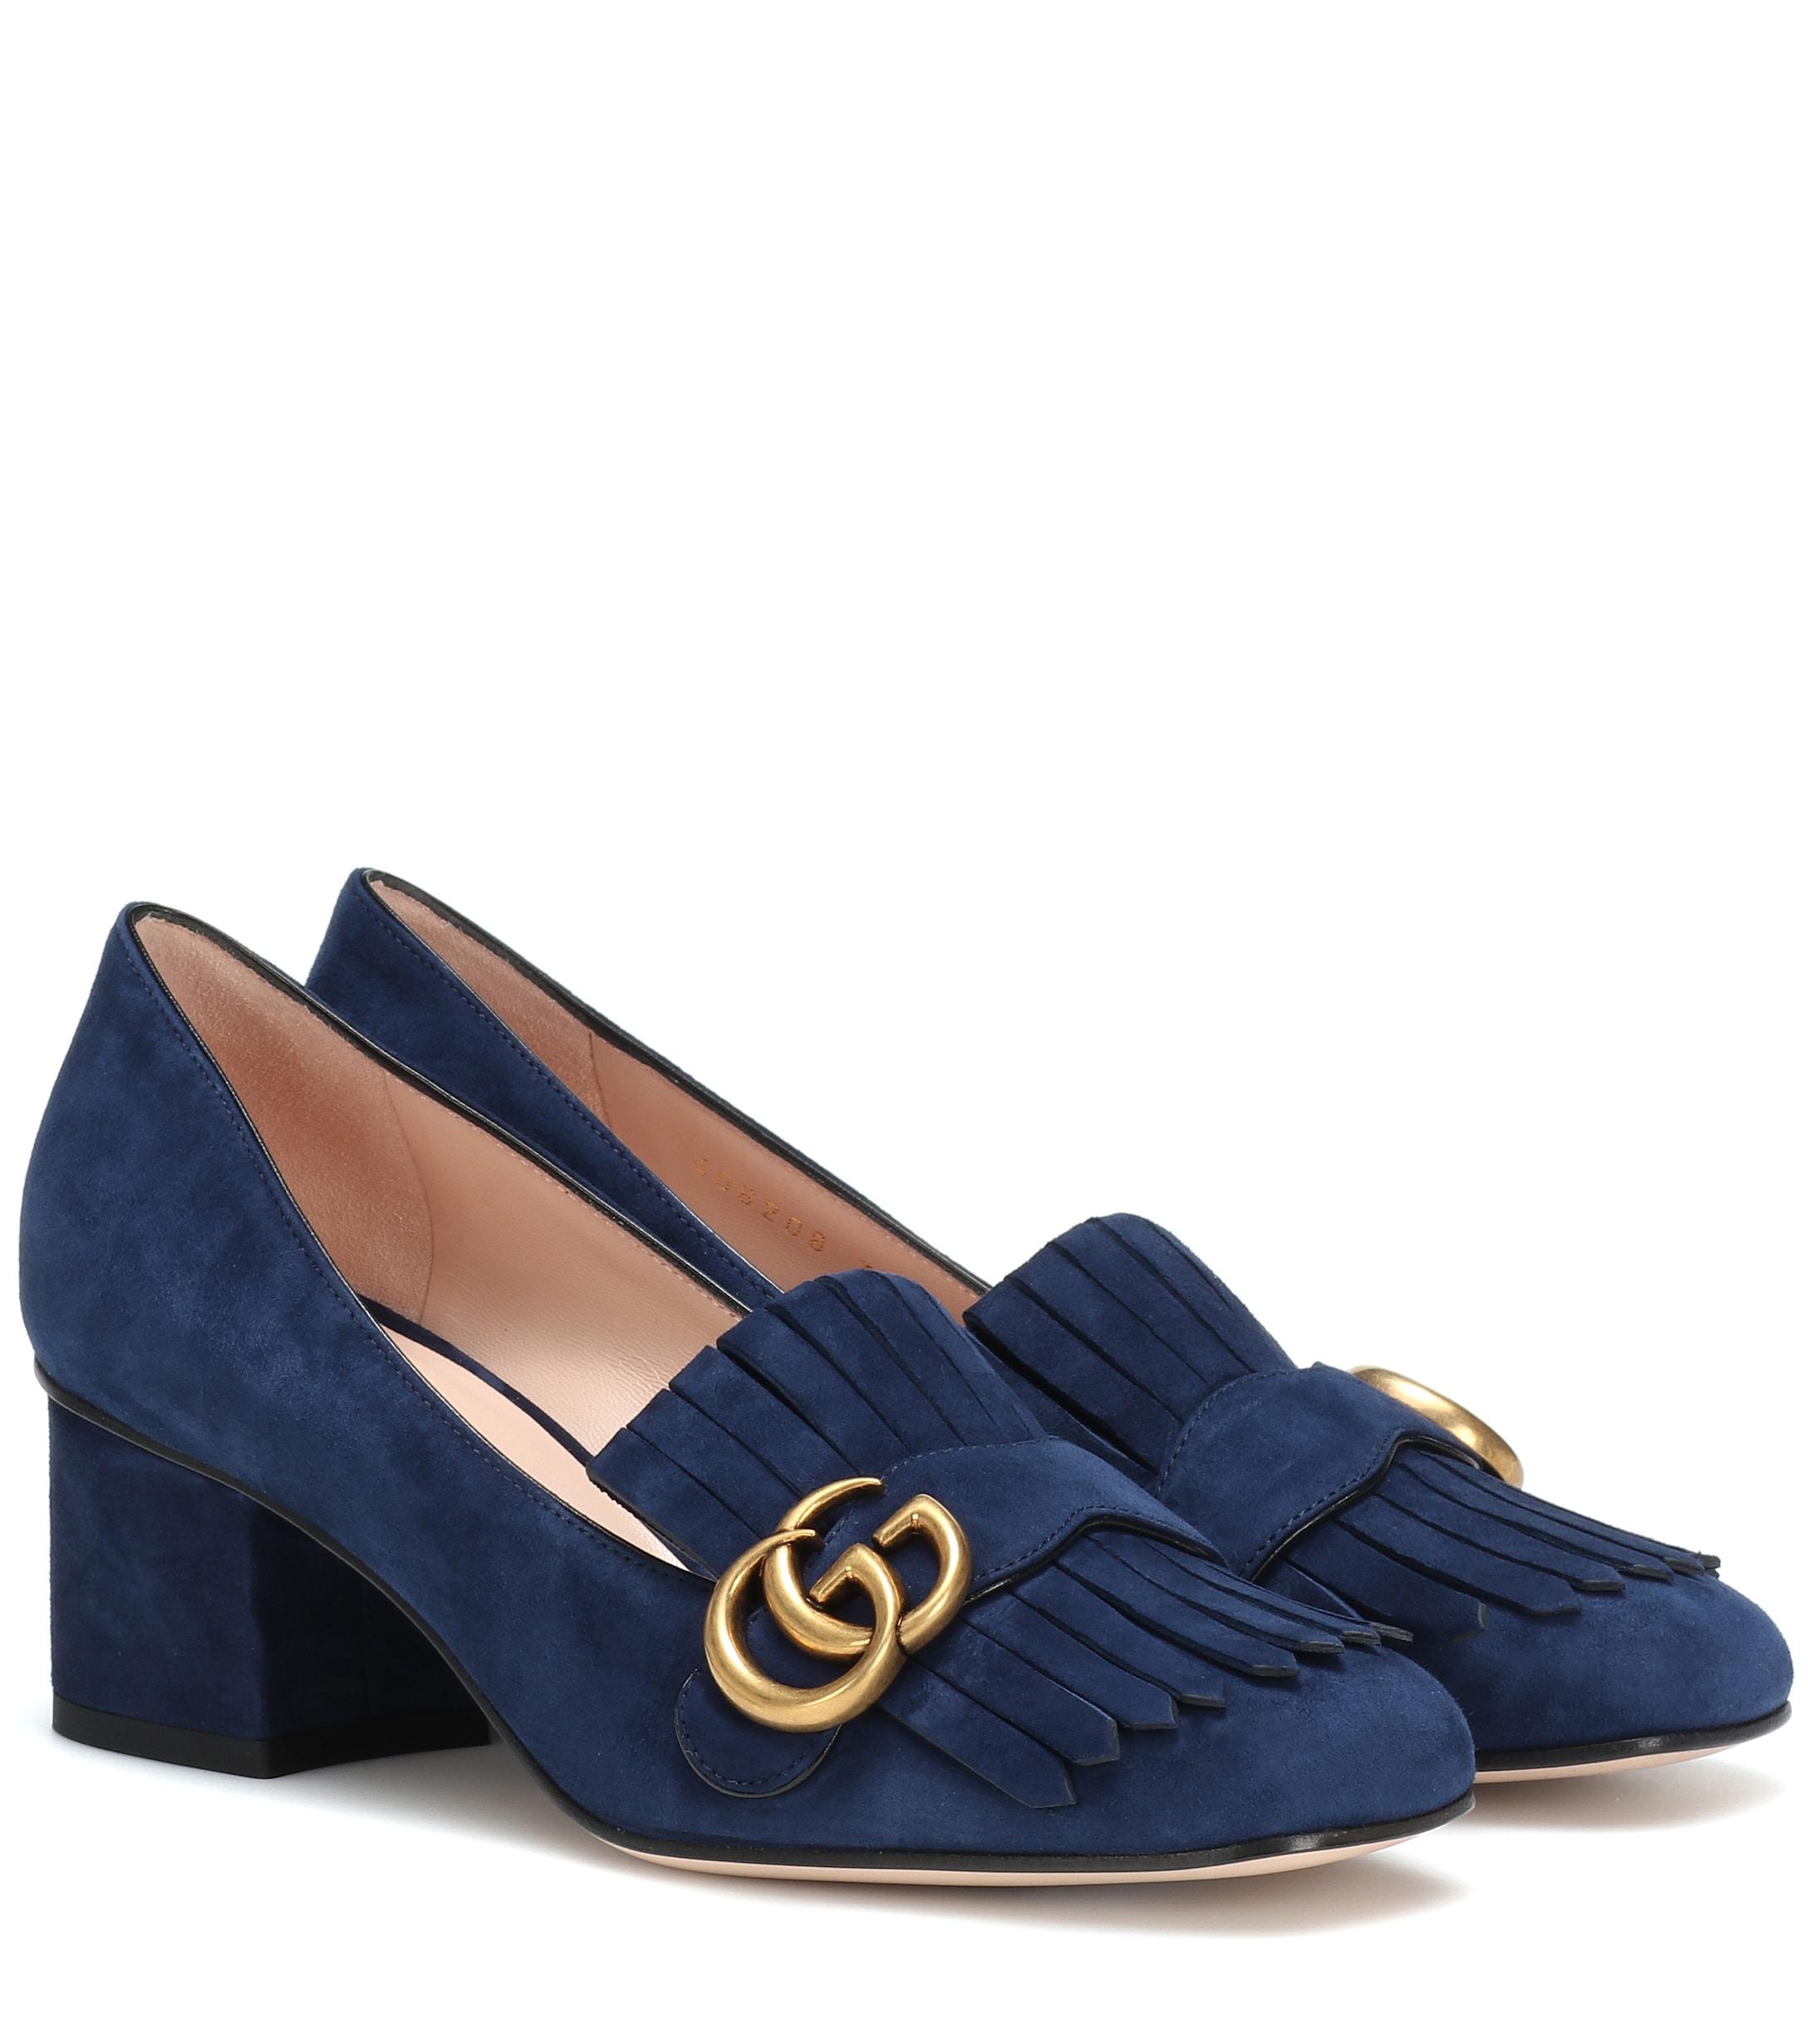 Gucci Leather Marmont Suede Loafer Pumps in Navy (Blue) - Save 31% - Lyst